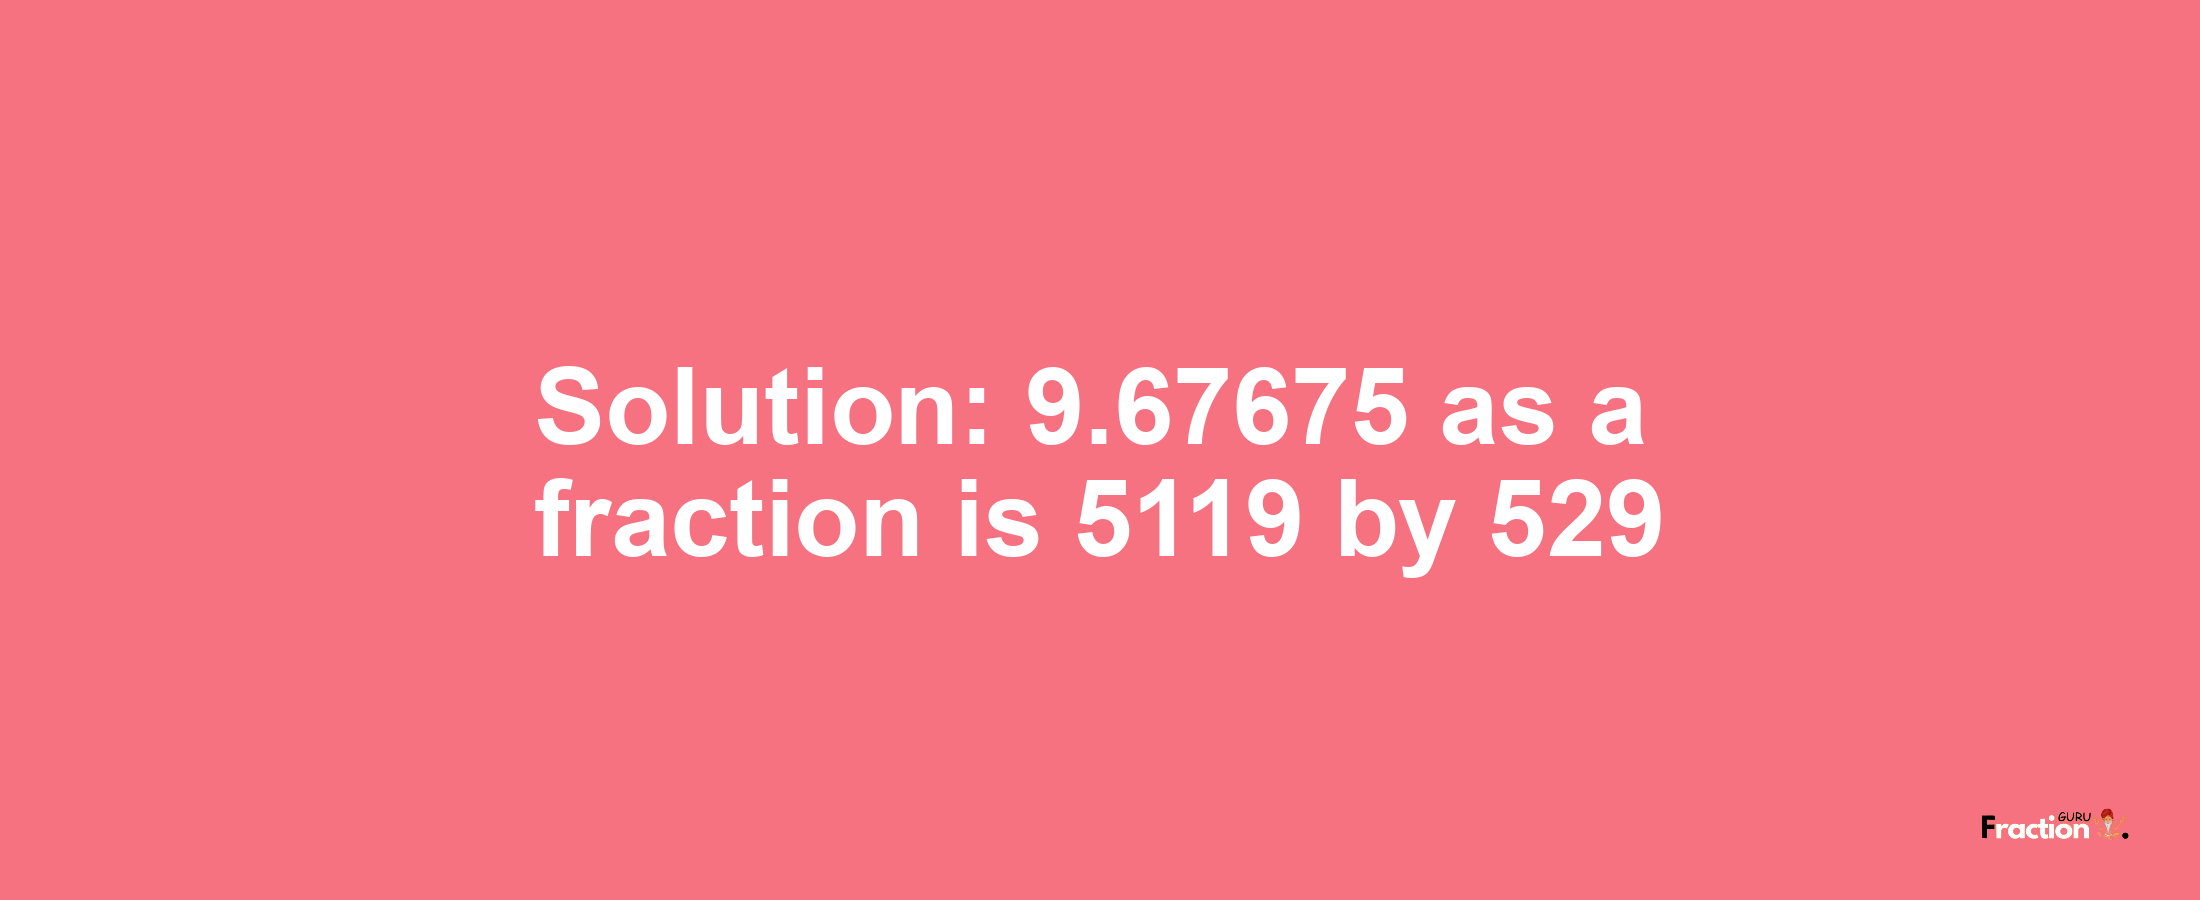 Solution:9.67675 as a fraction is 5119/529